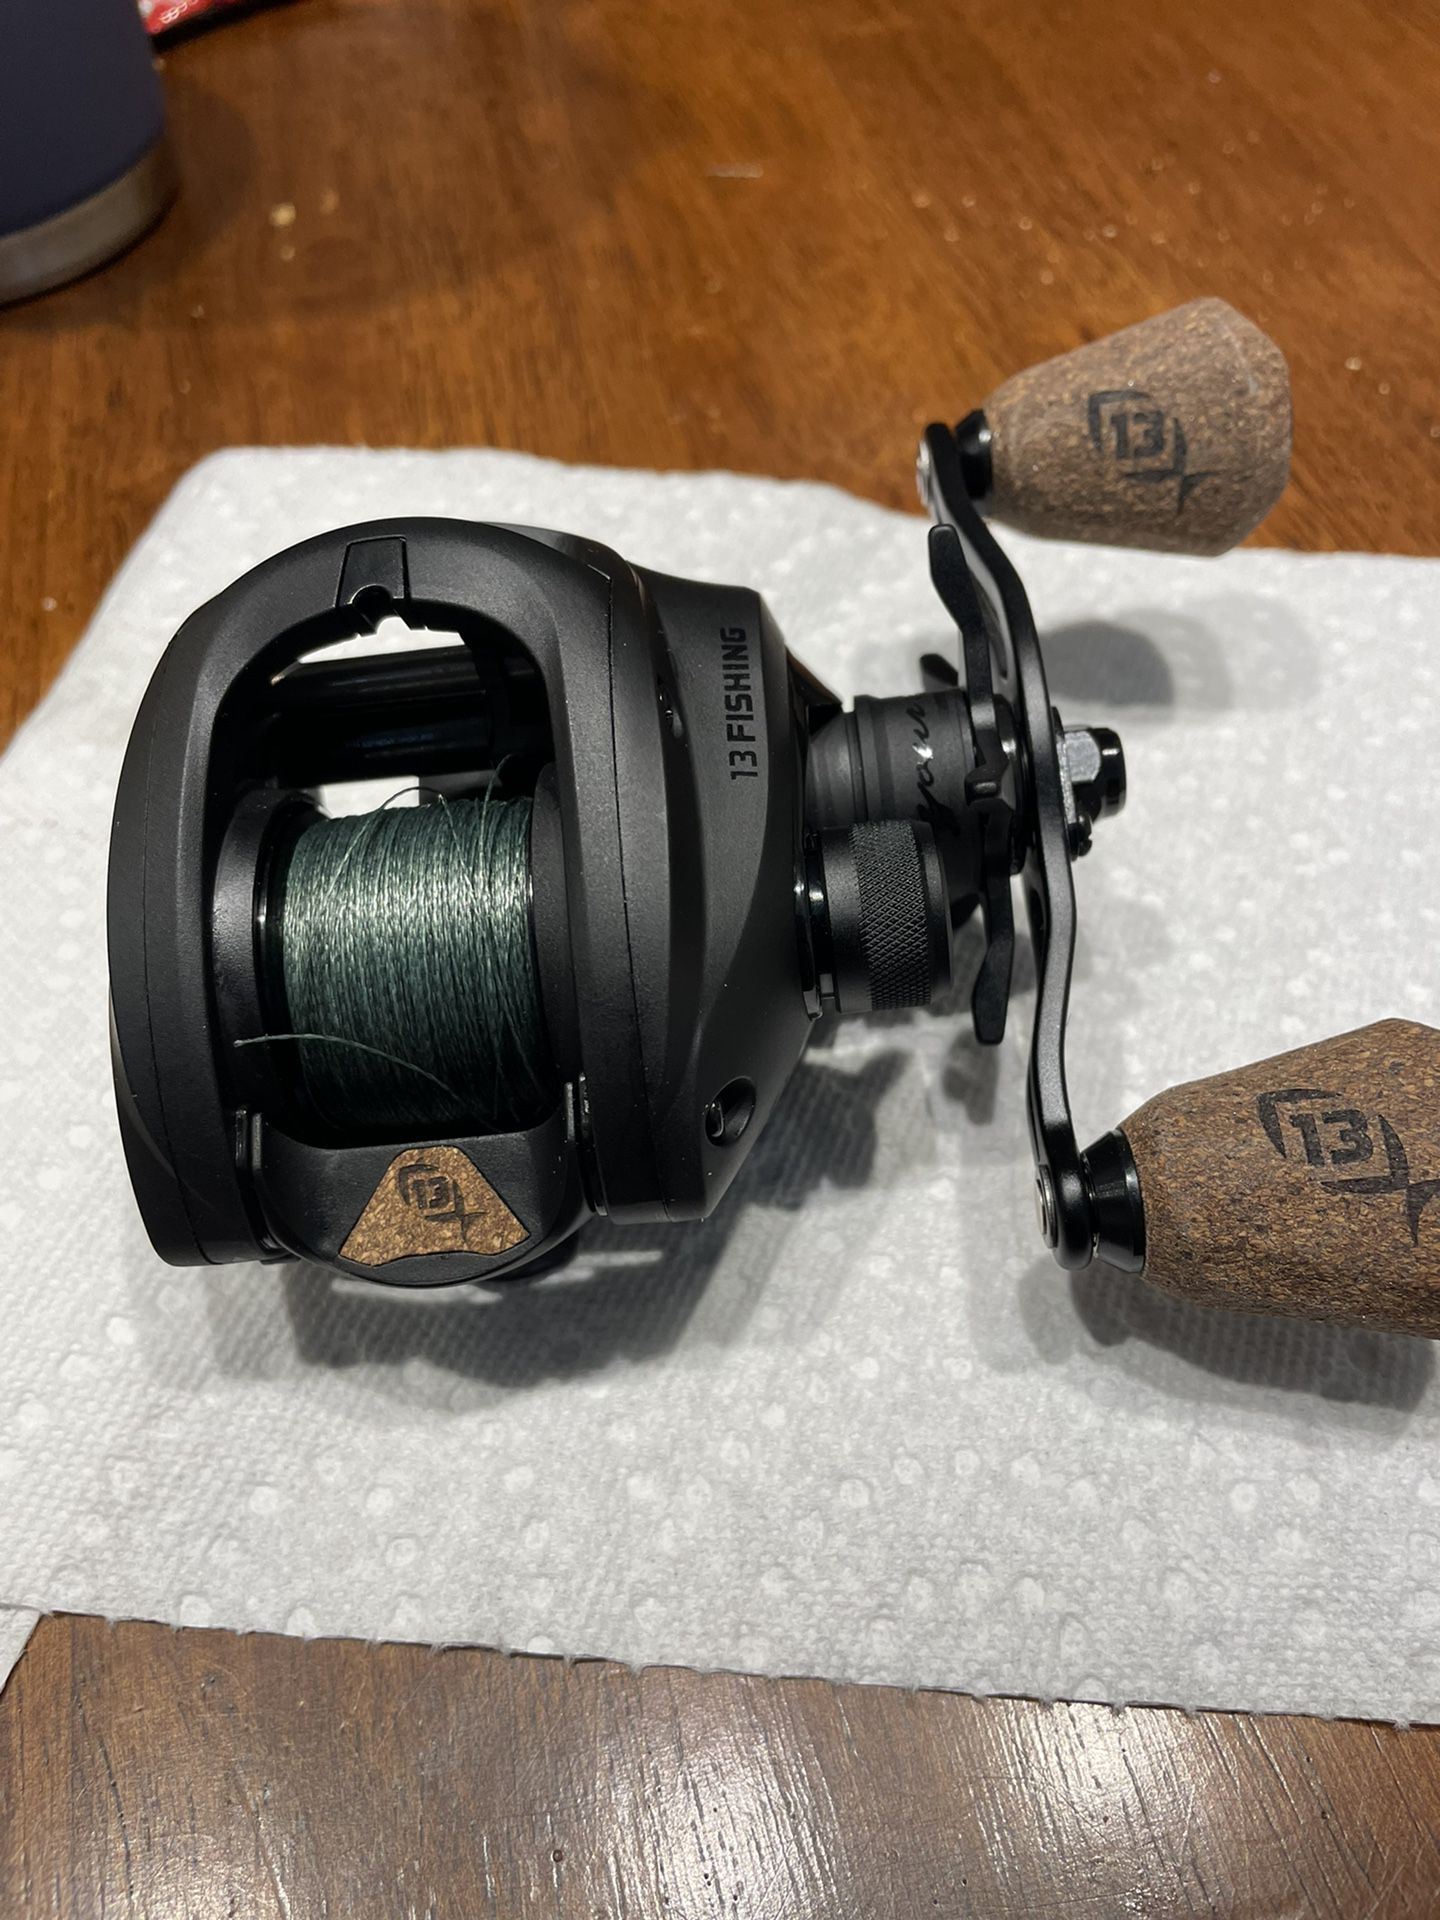 13 Fishing Concept A2 Combo for Sale in Humble, TX - OfferUp